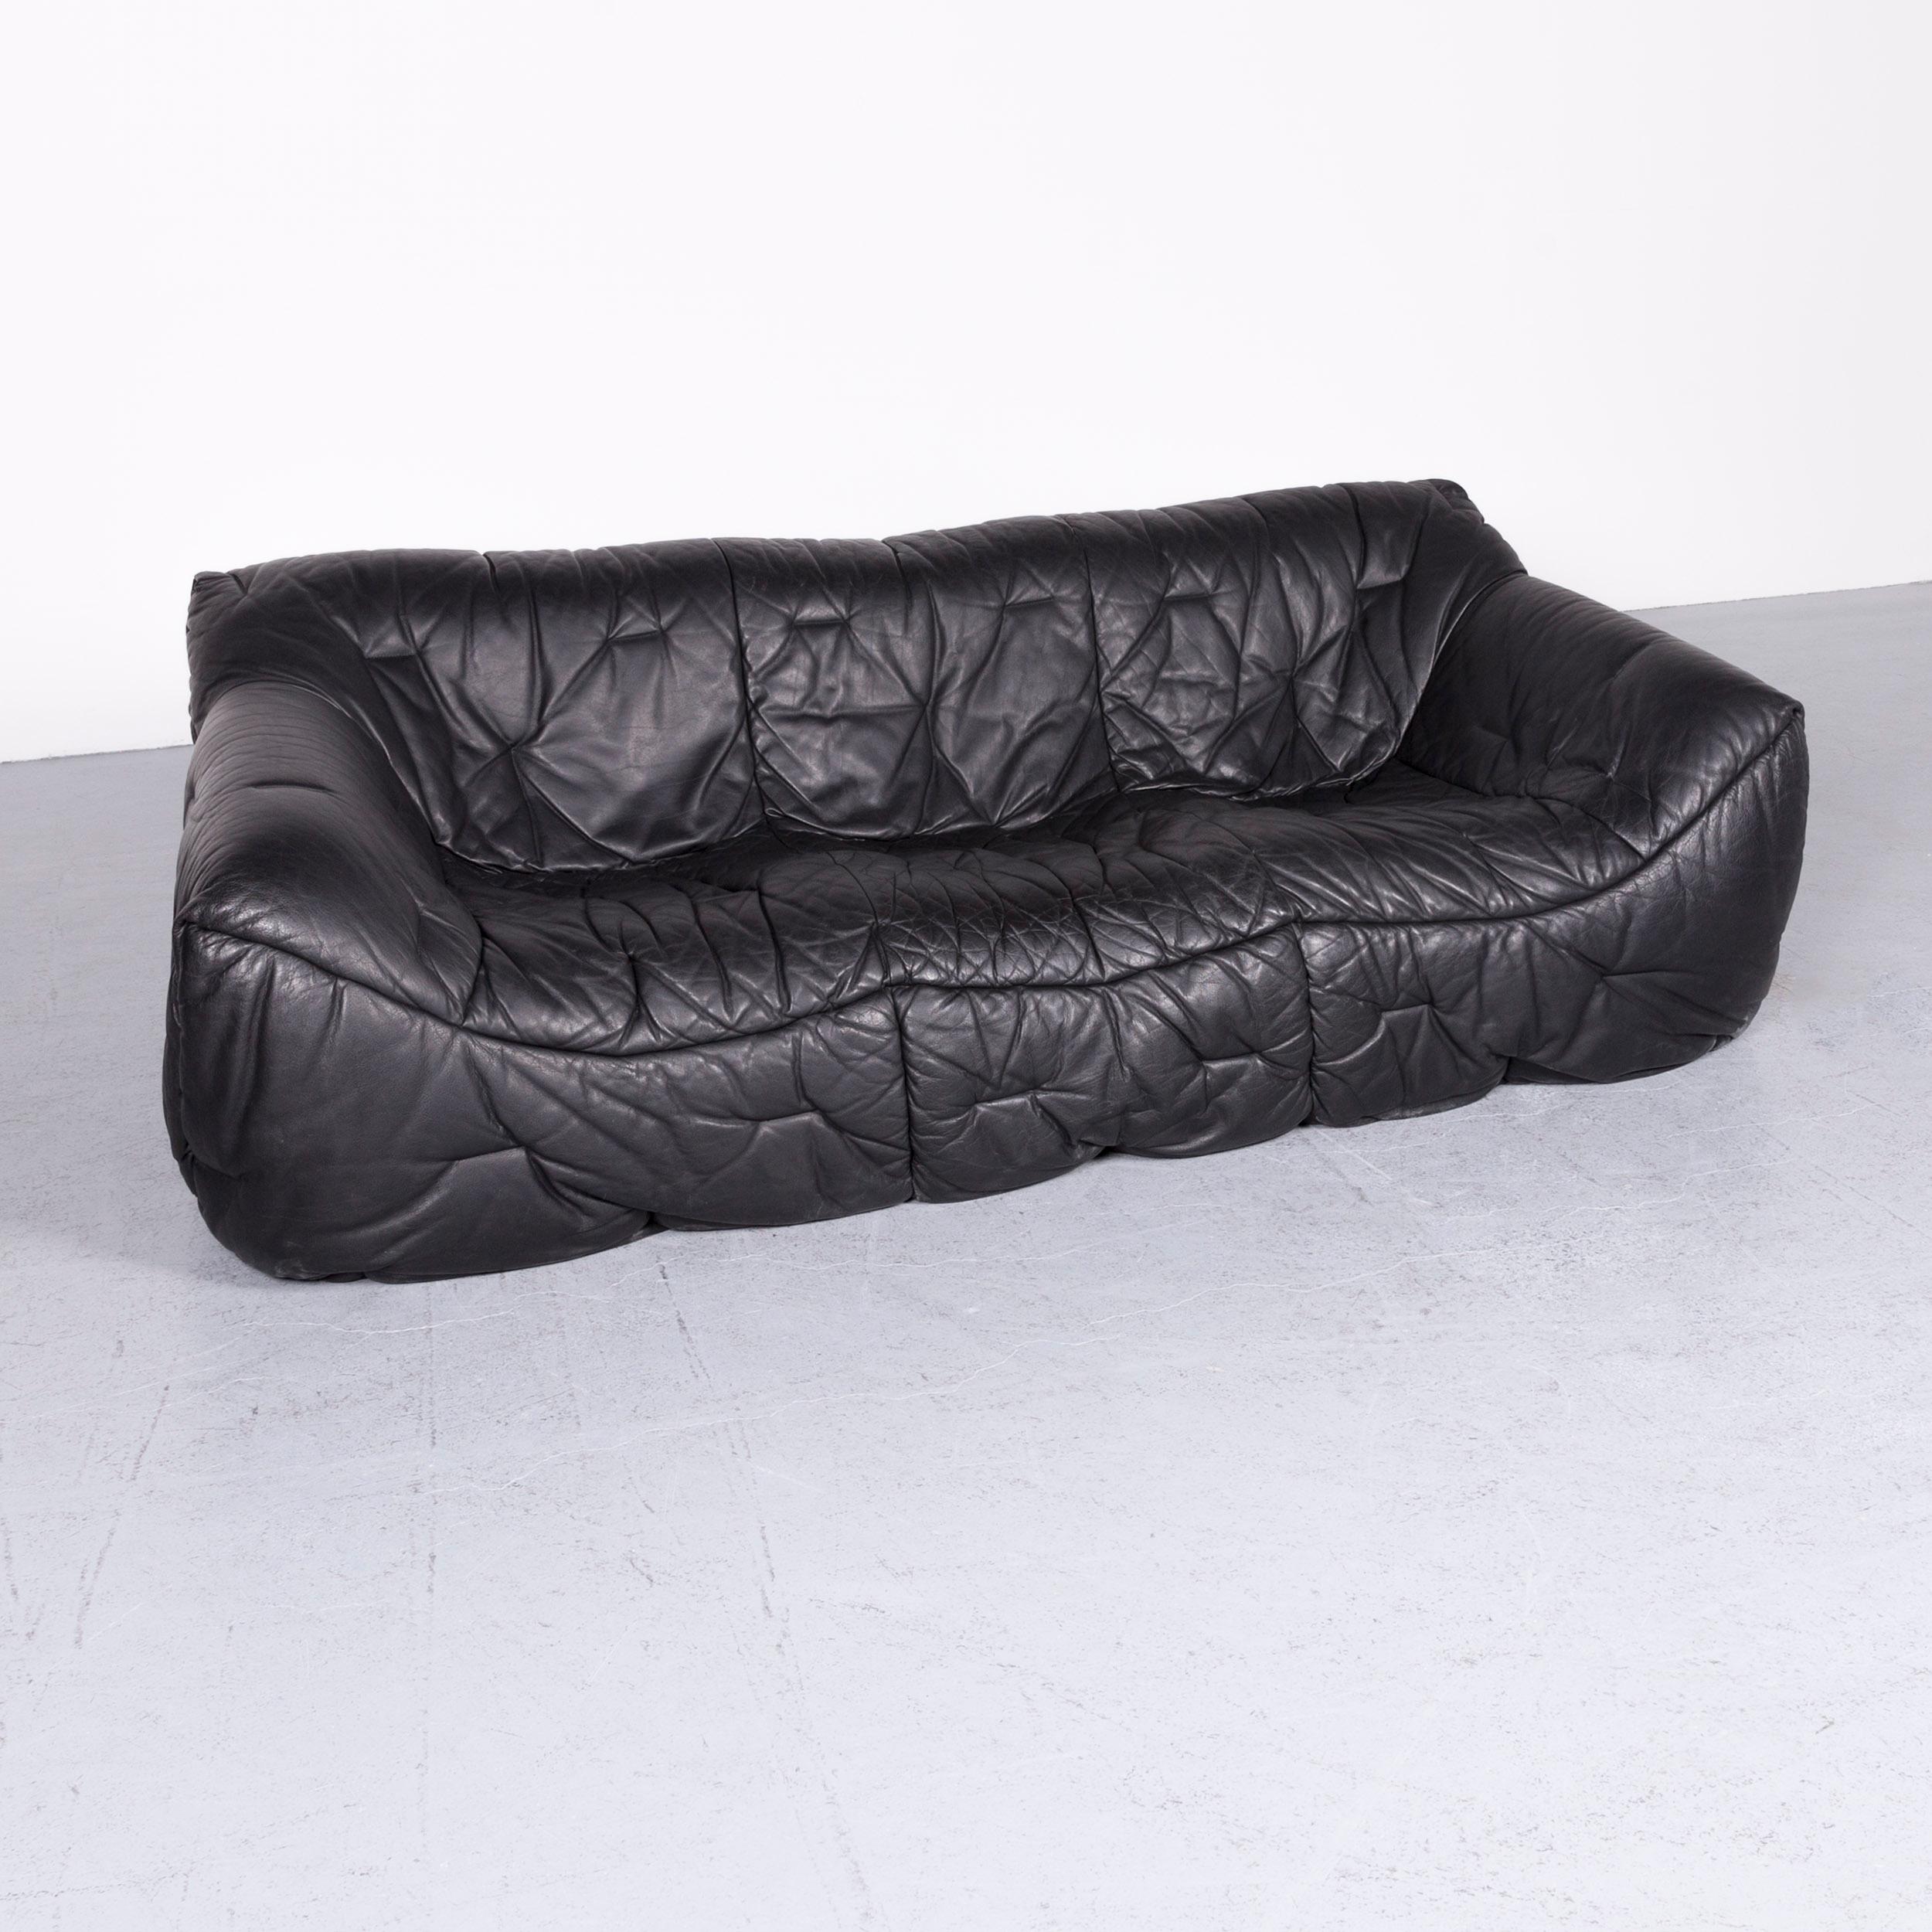 We bring to you a Roche Bobois Informel designer leather sofa black three-seat couch.

























